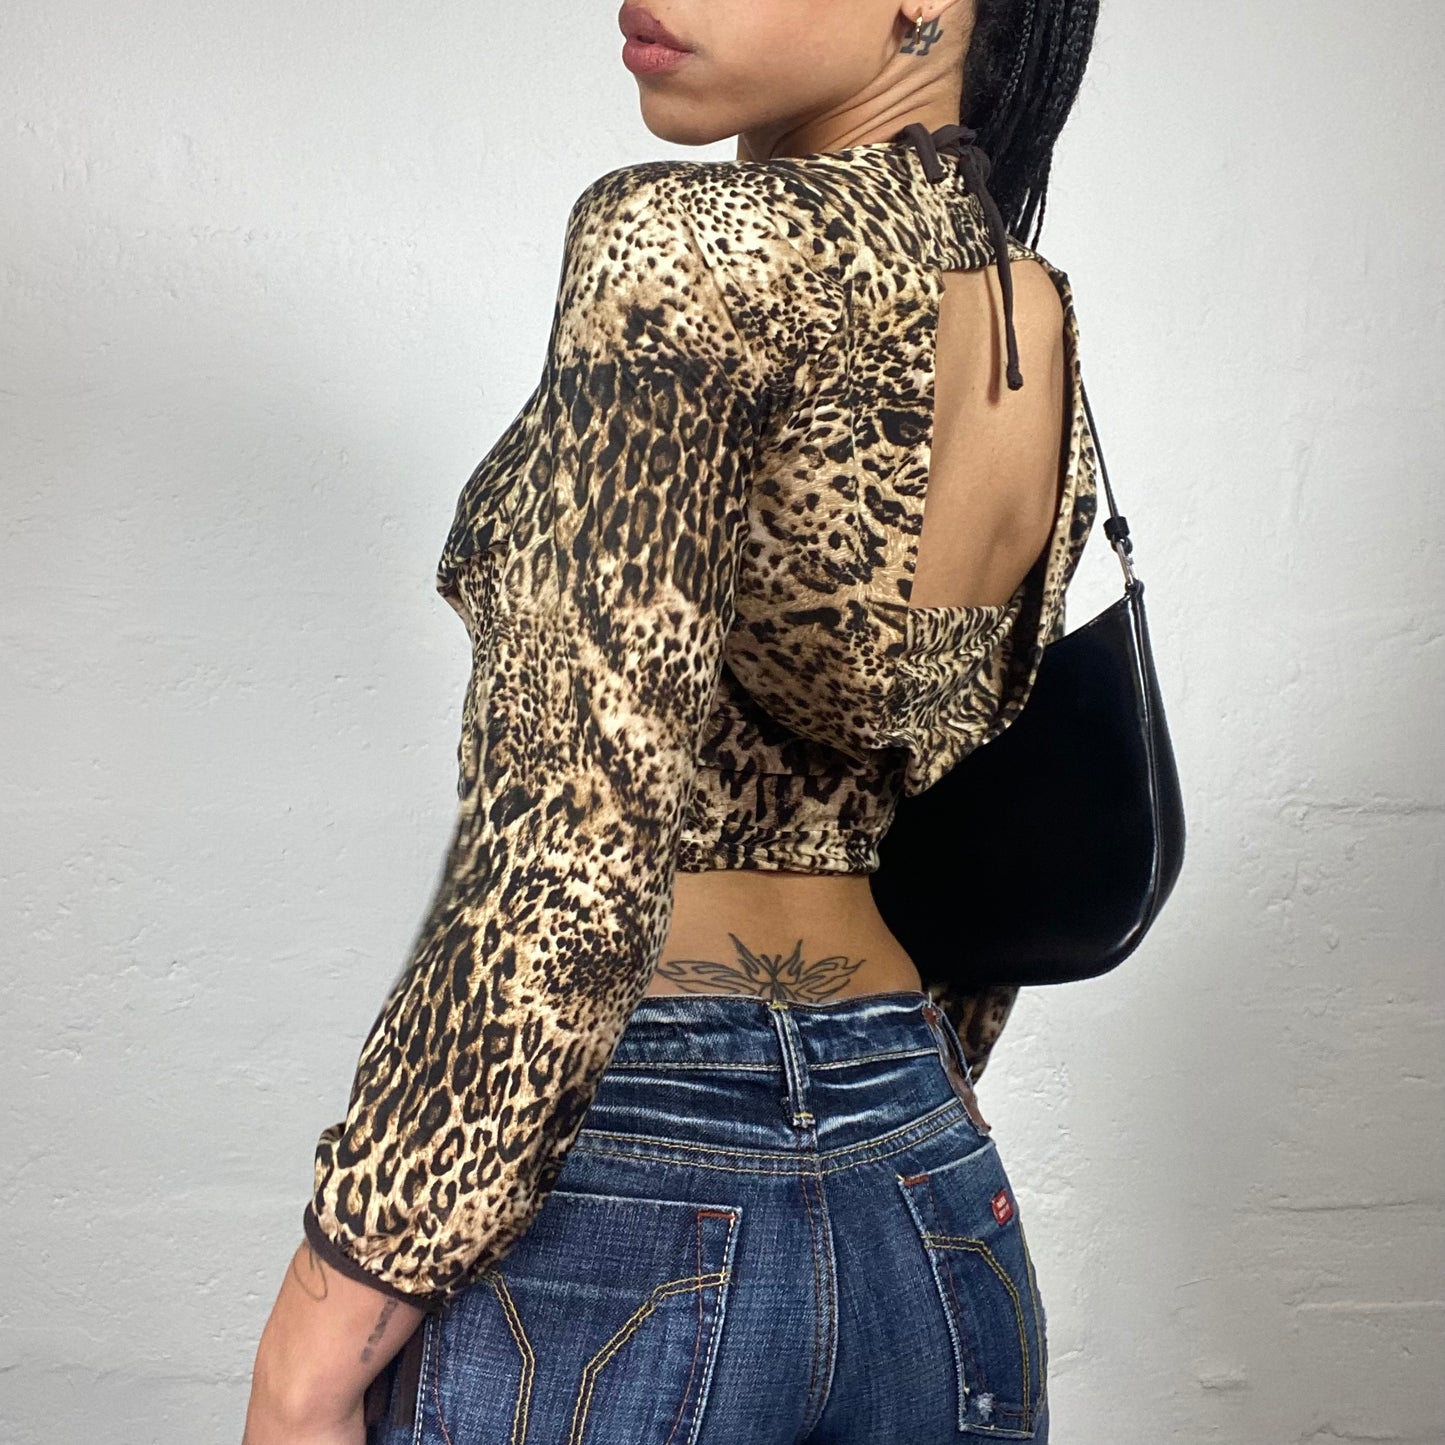 Vintage 2000's Downtown Glam Sand and Brown Toned Leo Printed Longsleeve Cropped Top with Open Back (S)